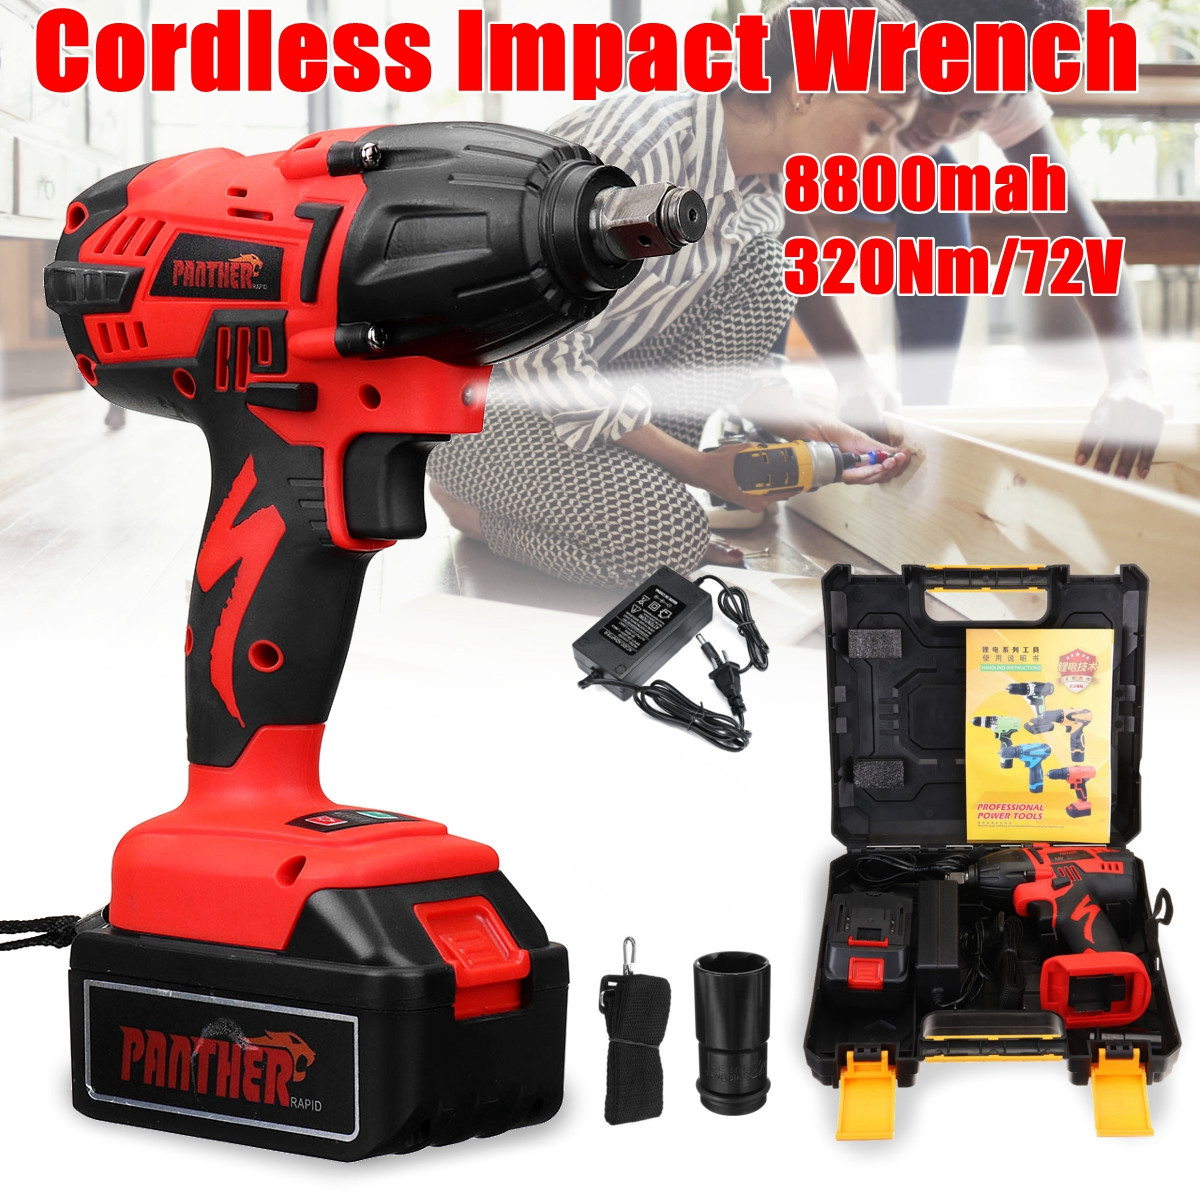 8800mah-Cordless-Electric-Impact-Wrench-LED-Light-320Nm-Torque-Impact-Wrench-Li-Ion-Battery-1402464-1